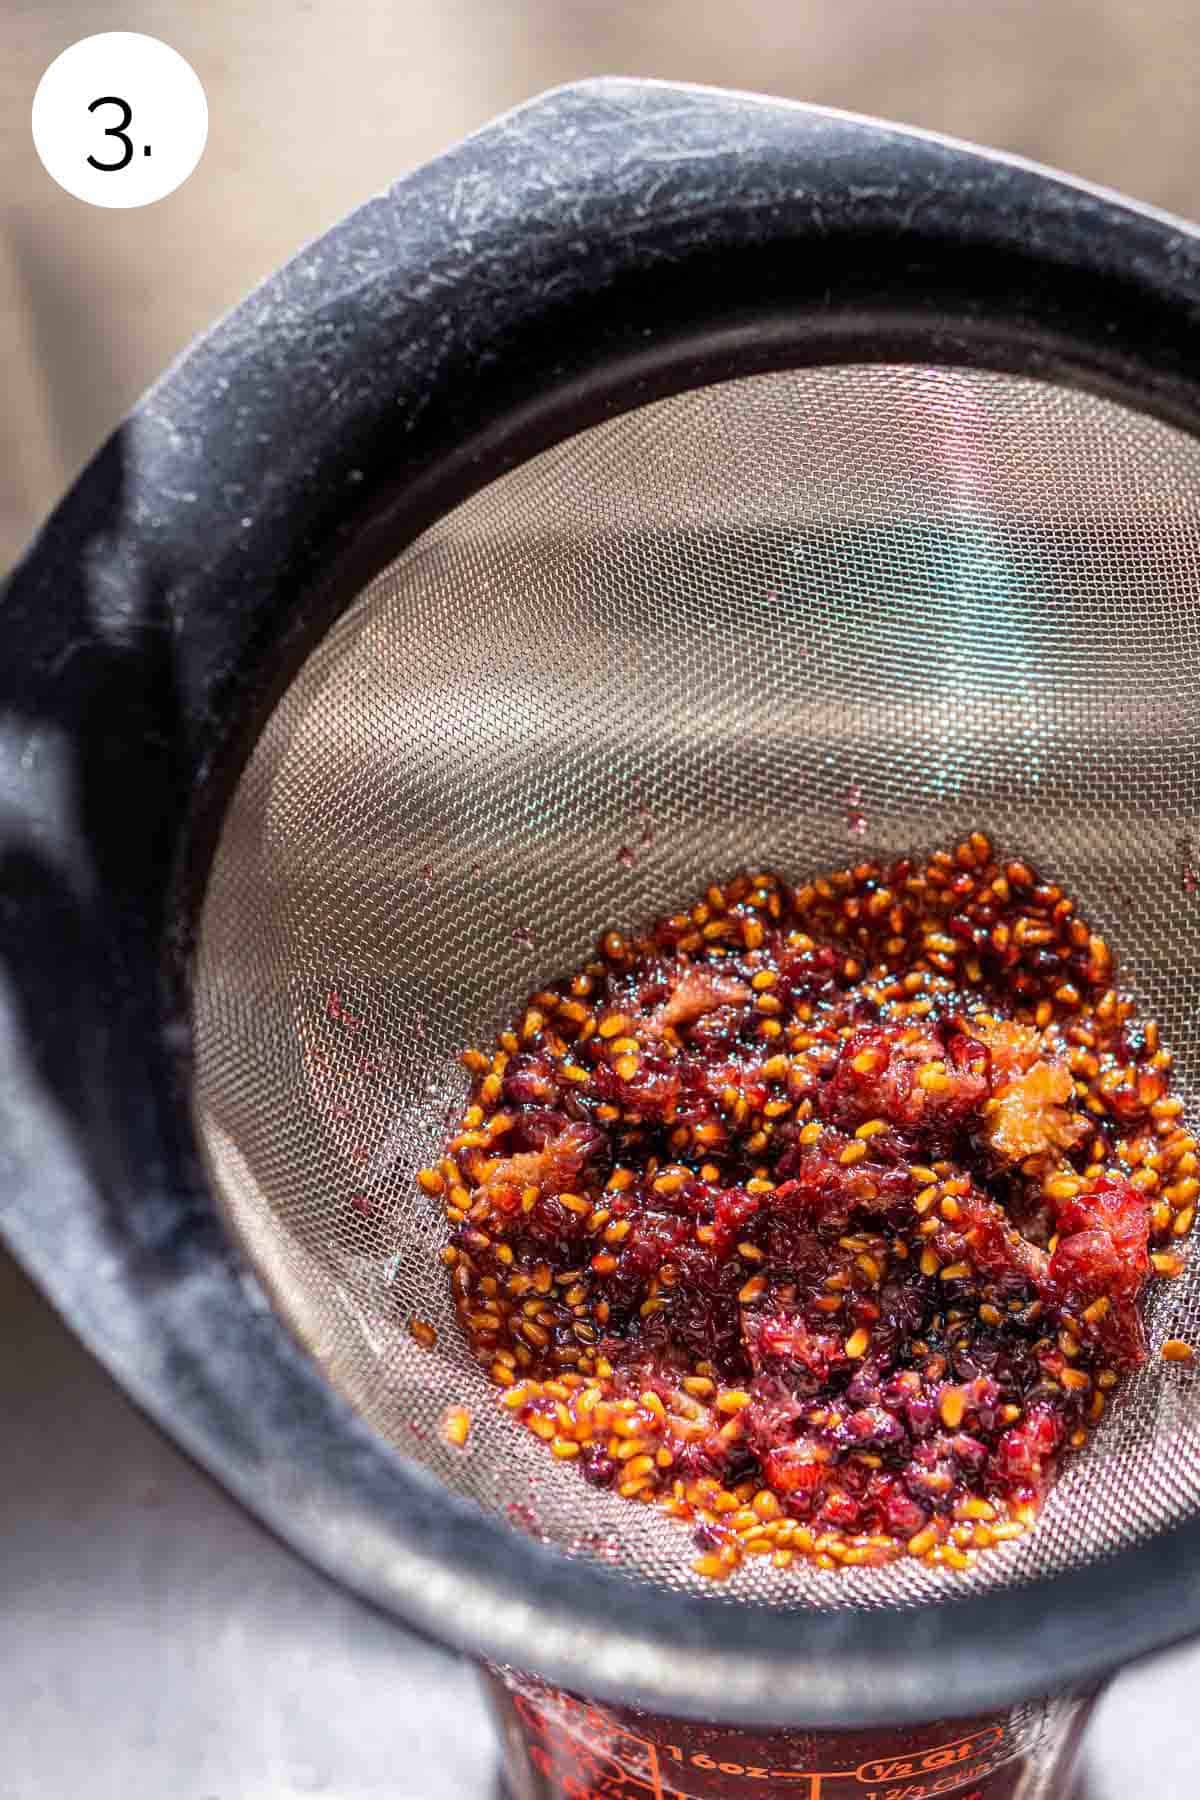 Straining the crushed blackberries from the syrup in a fine-mesh sieve over a kitchen sink.